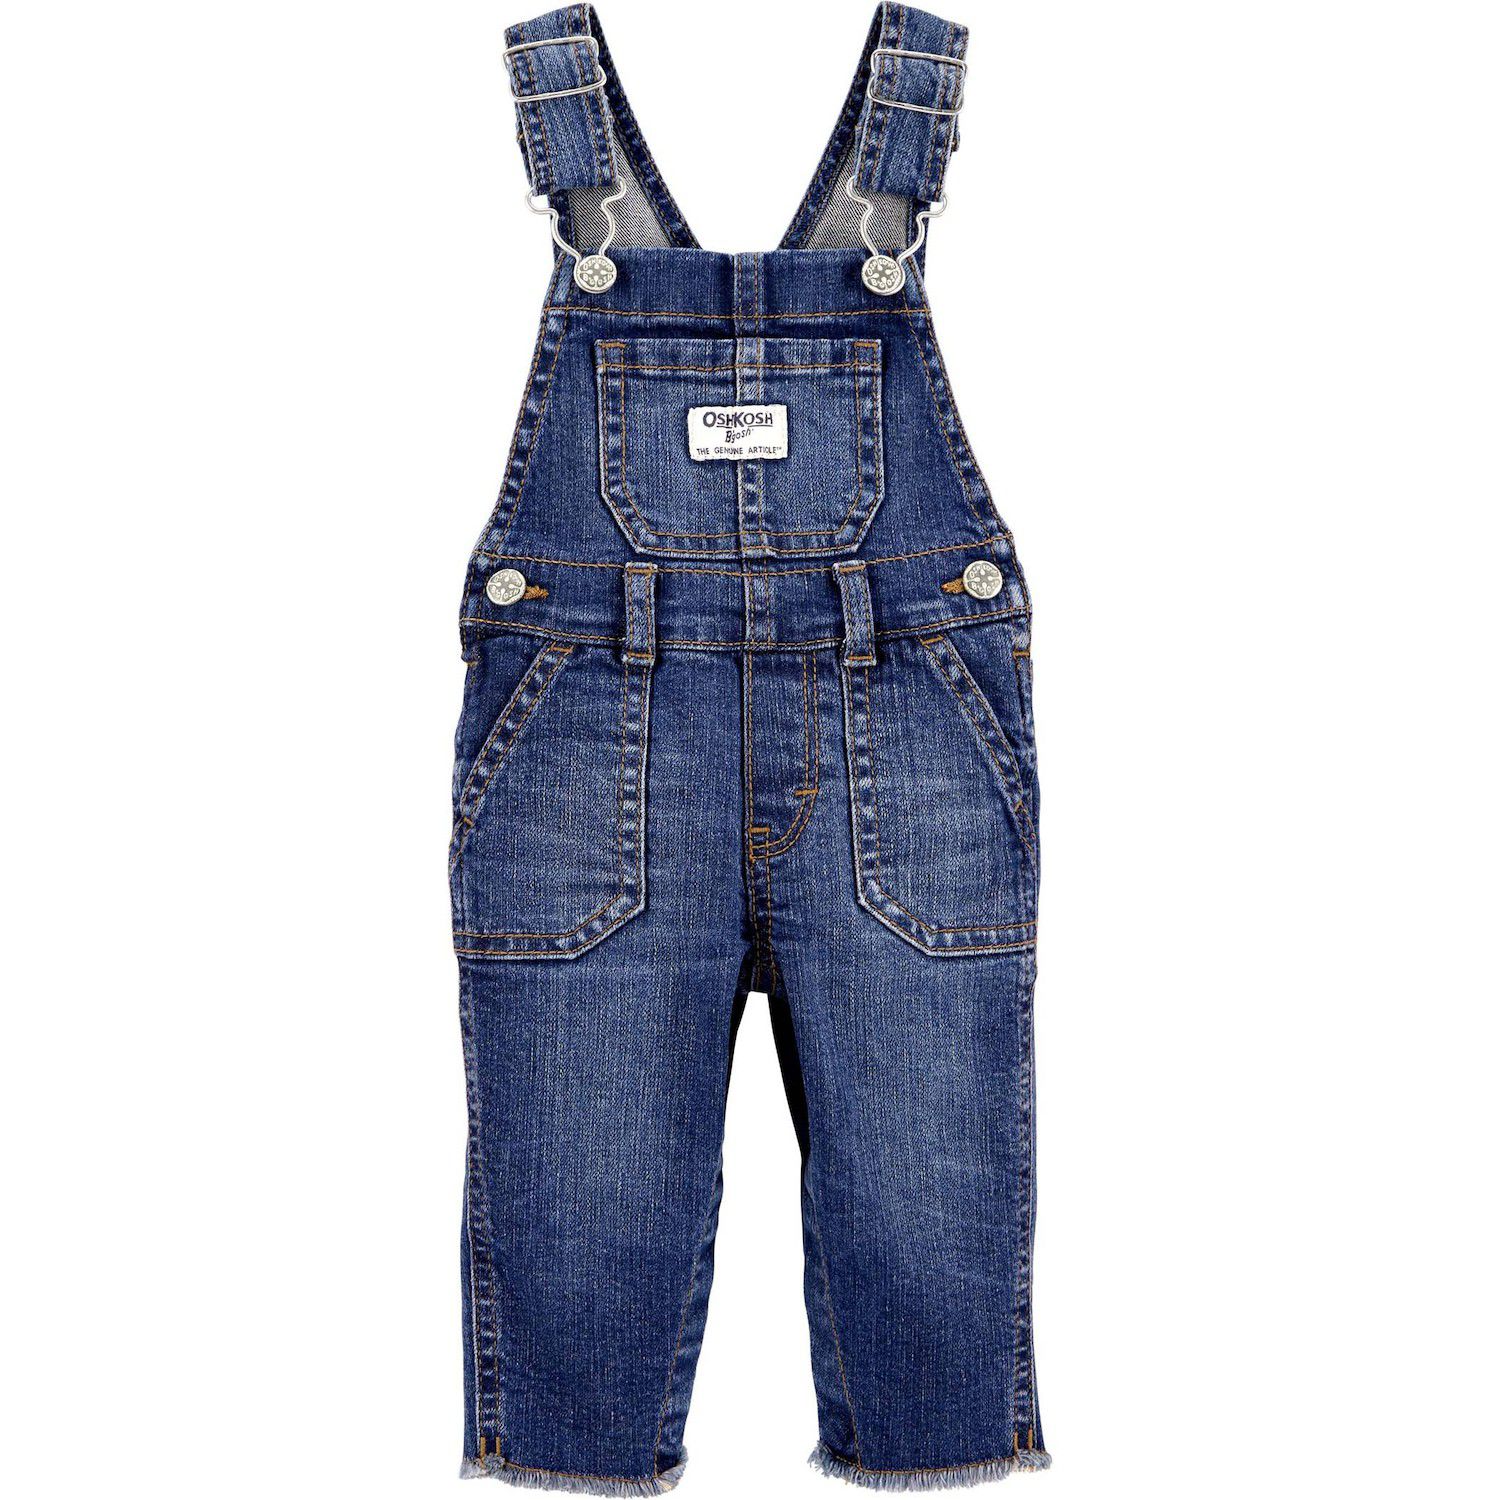 jean overalls for baby girl